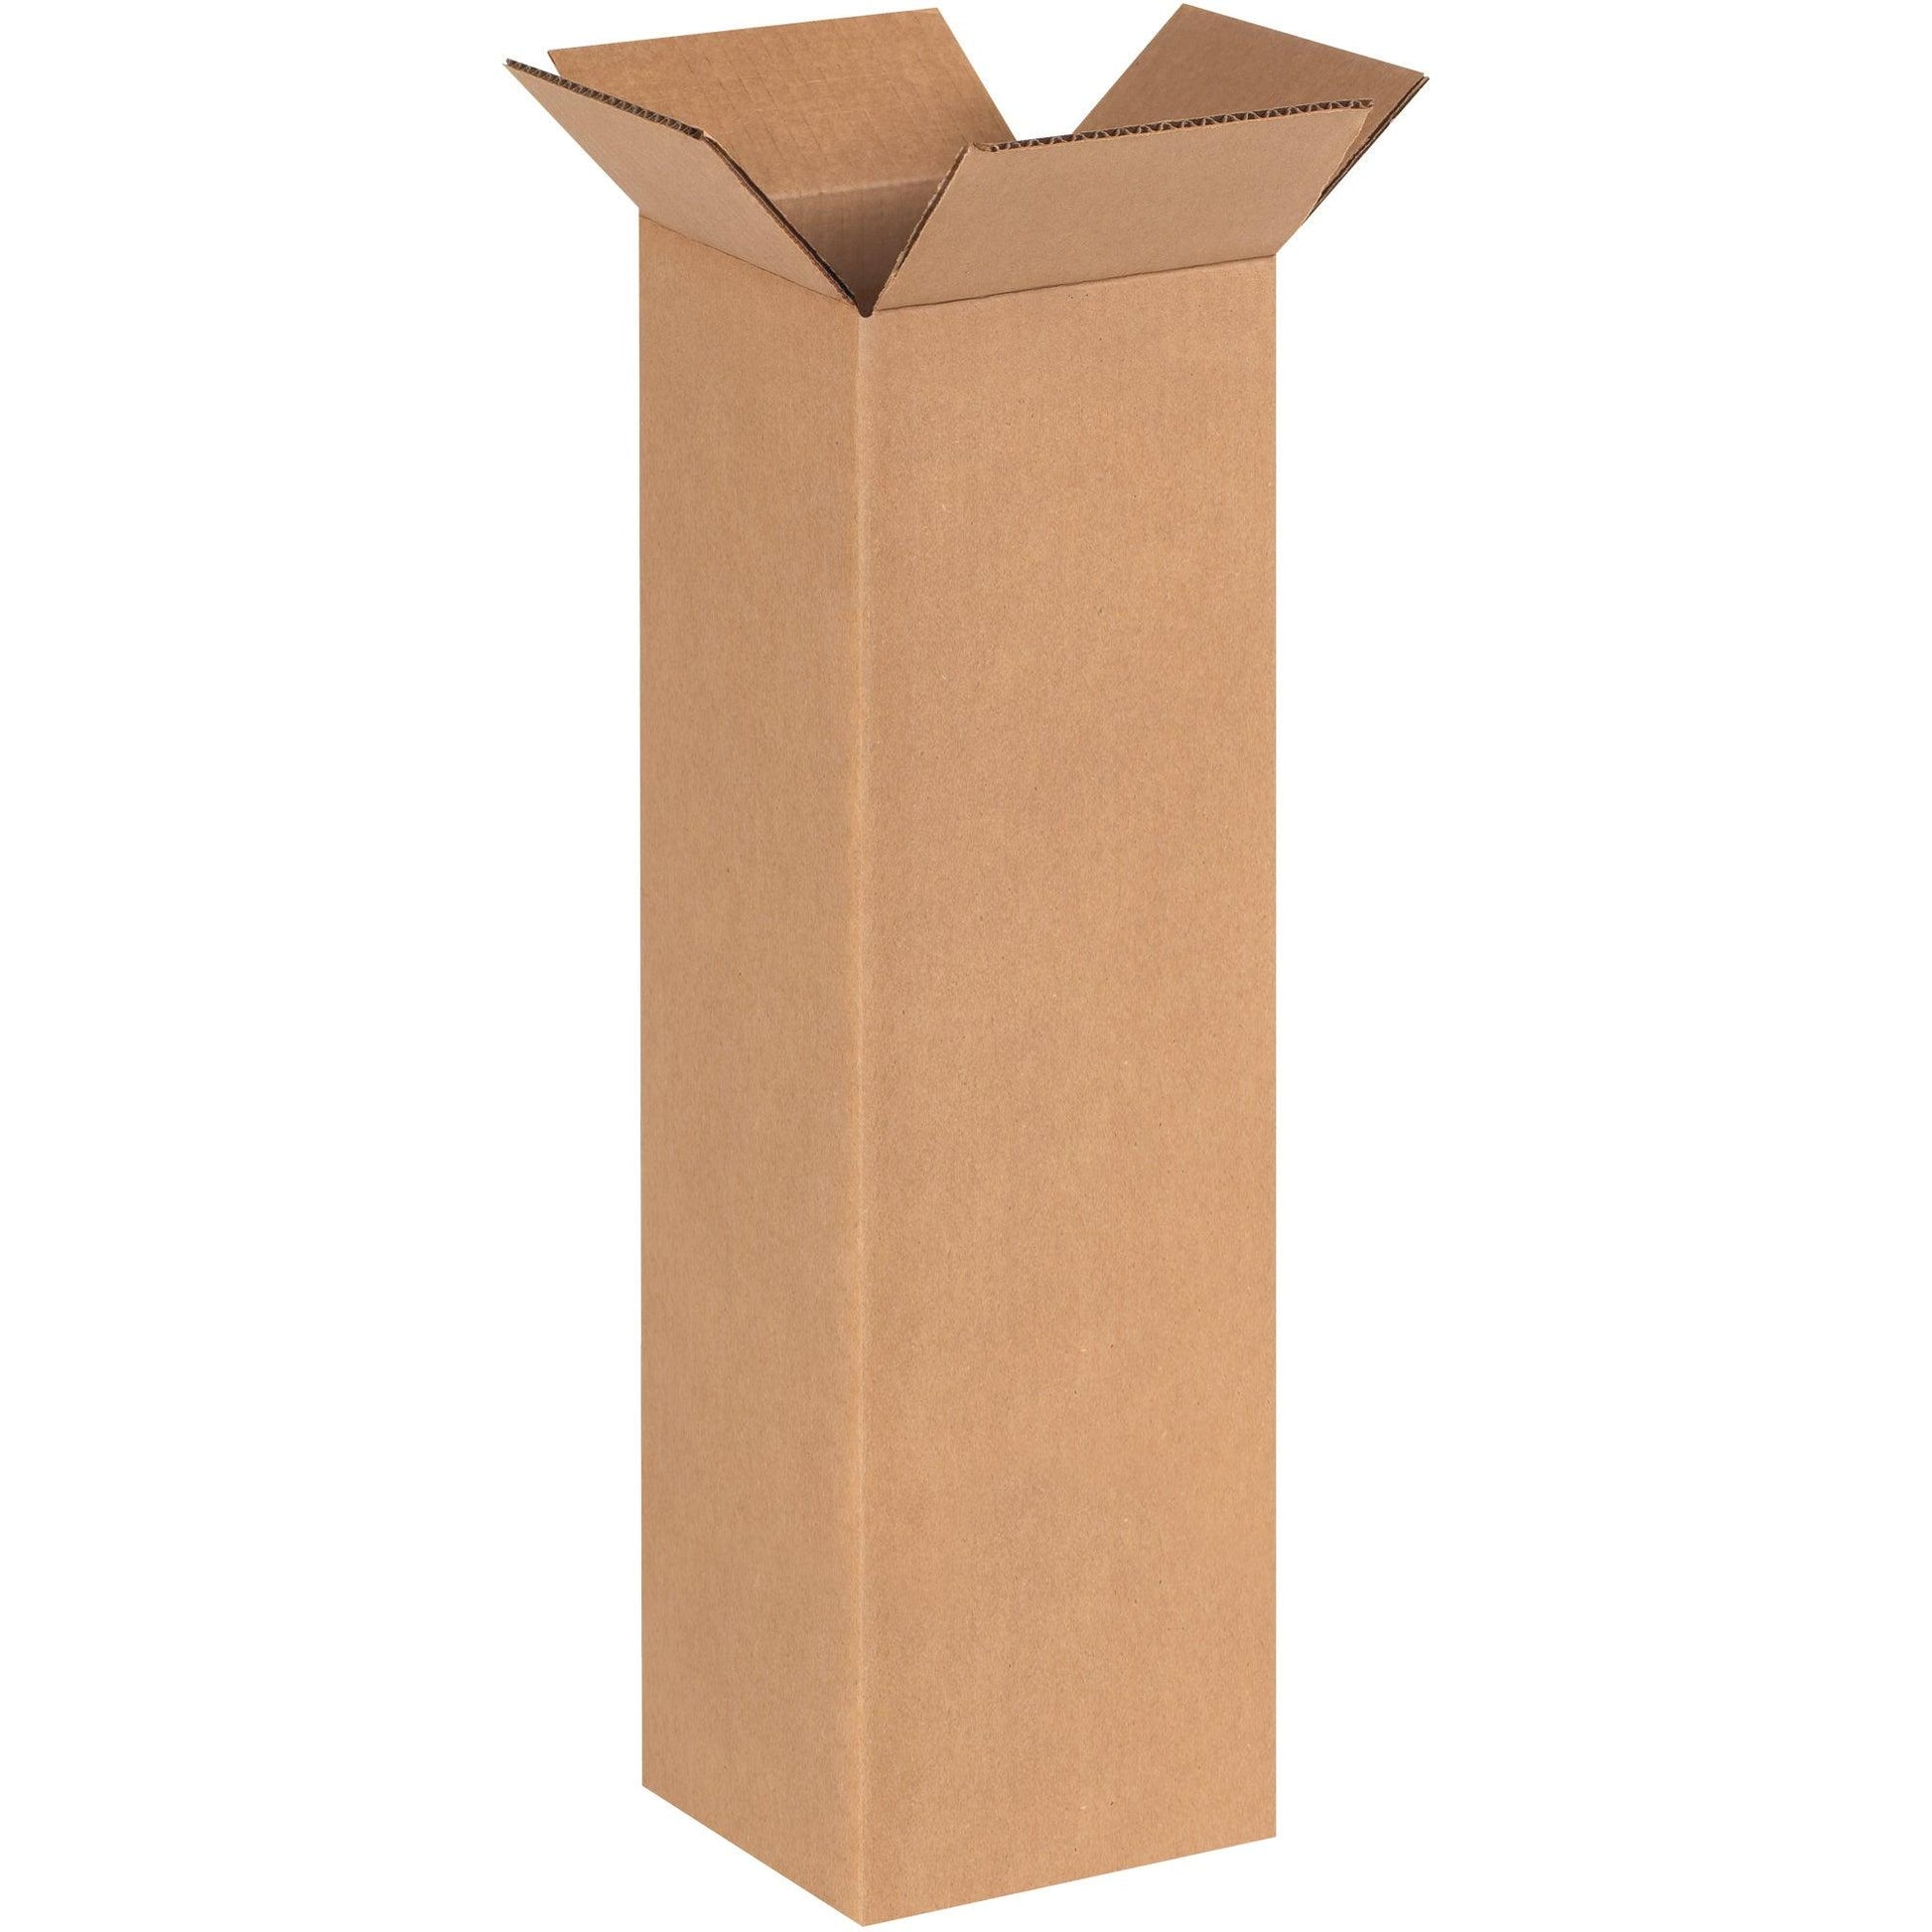 6 x 6 x 20" Tall Corrugated Boxes - 6620